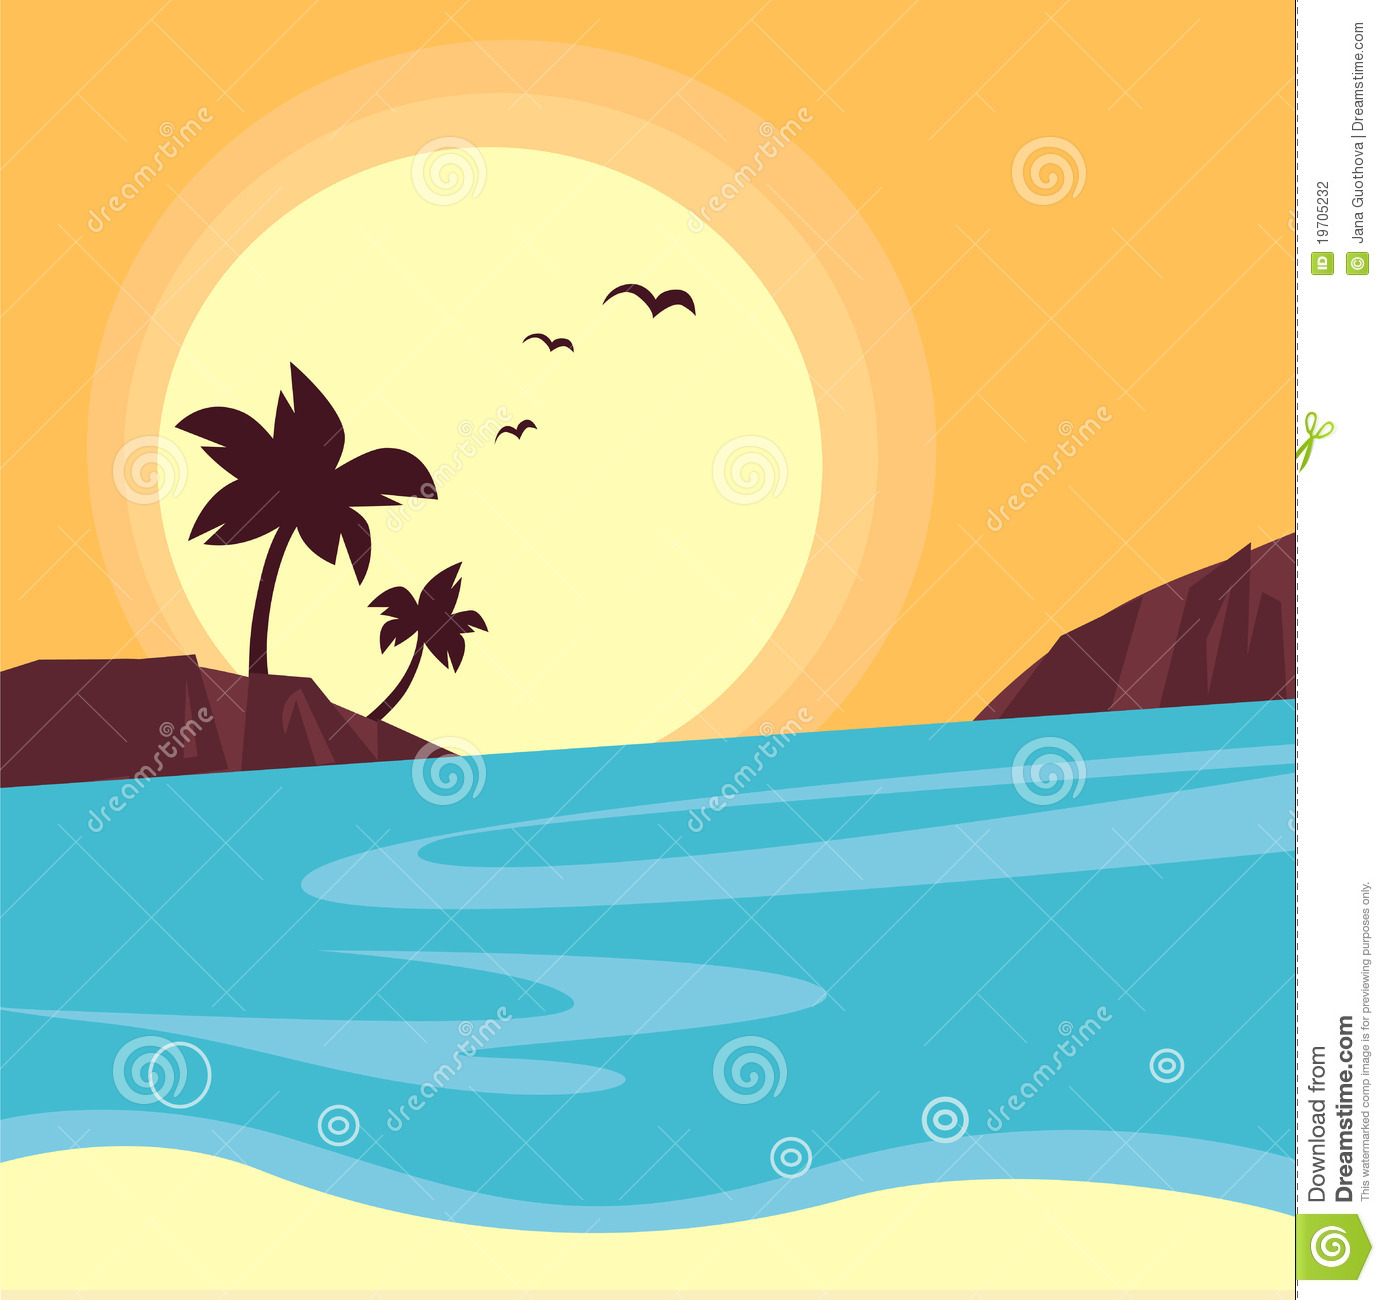 Palm Tree Beach Sunset   Clipart Panda   Free Clipart Images